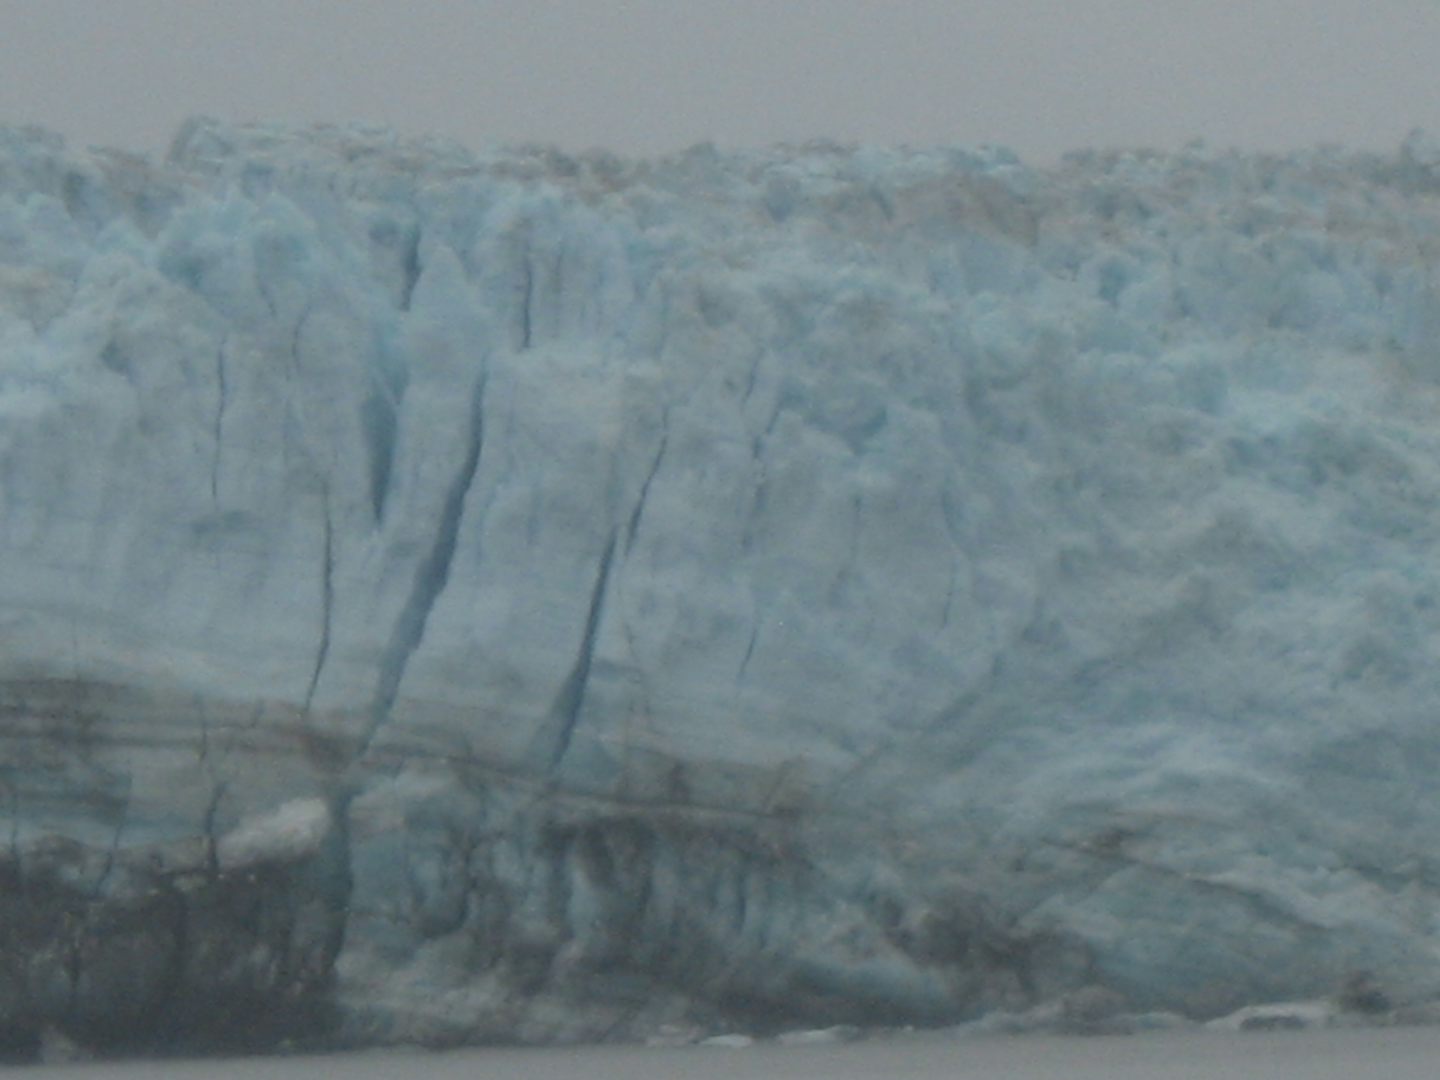 View of Hubbard Glacier from ship